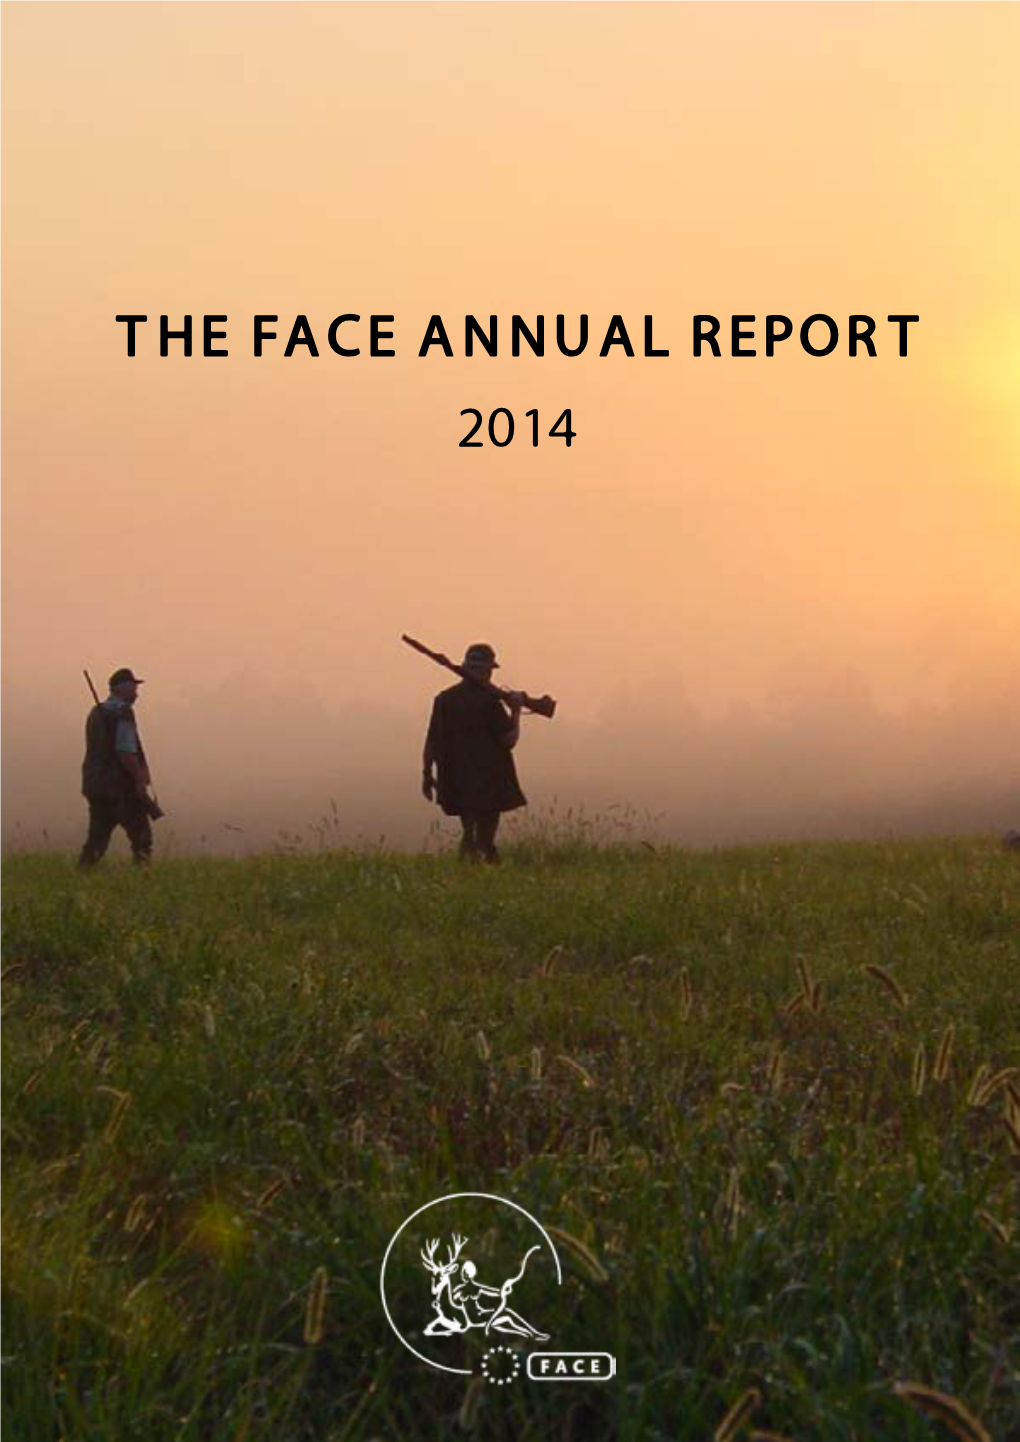 The Face Annual Report 2014